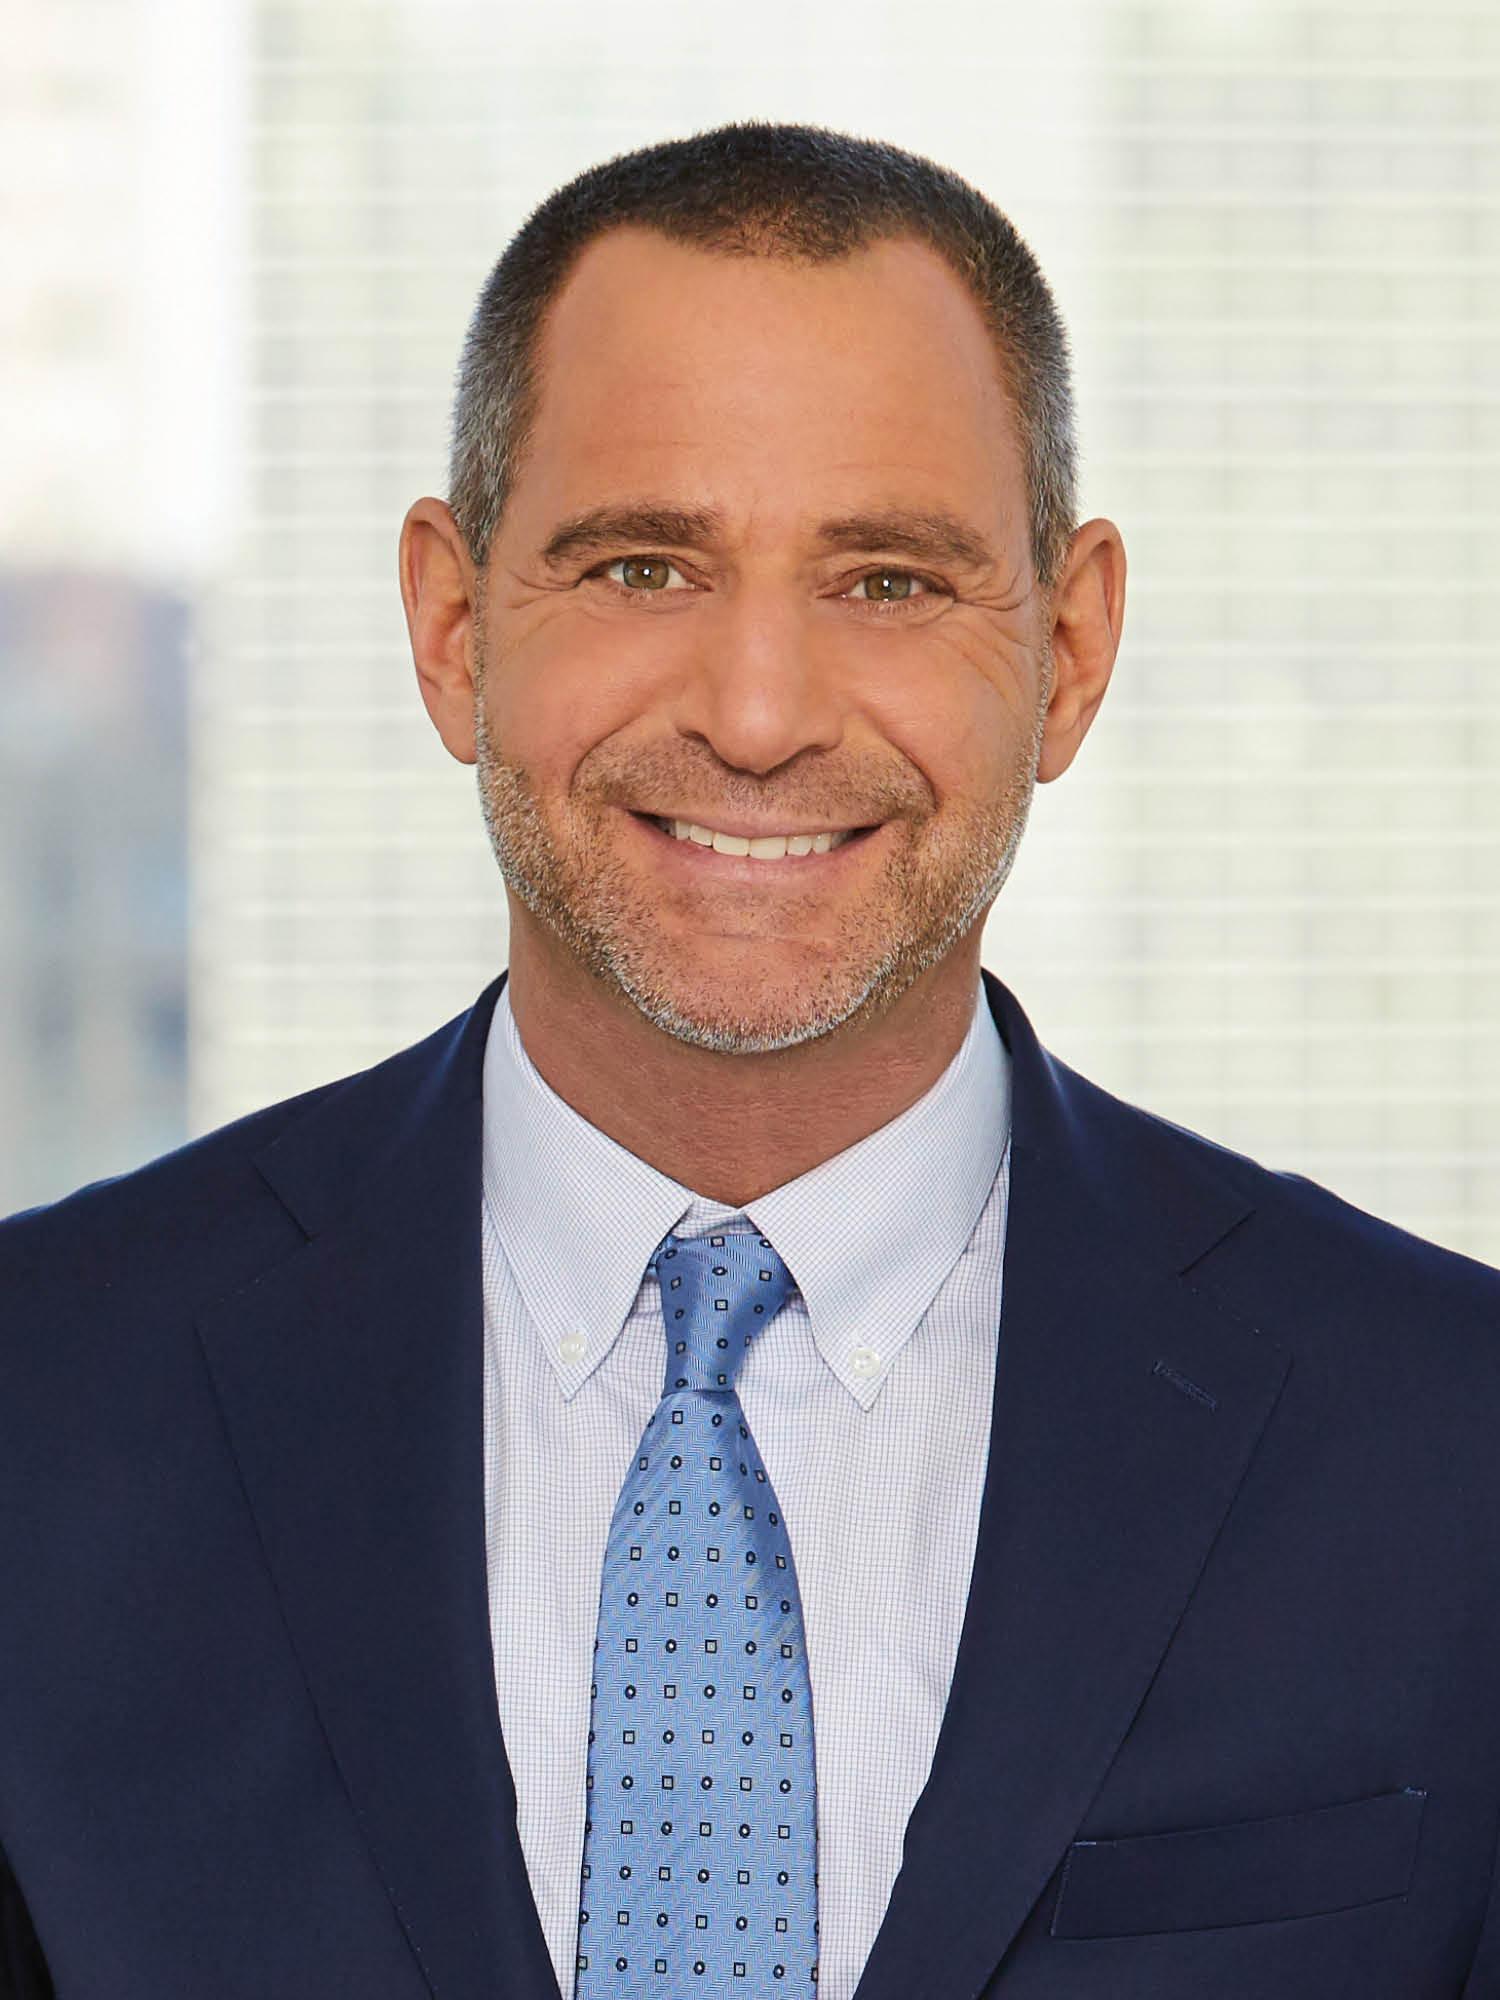 Gary Malin | Chief Operating Officer of The Corcoran Group, a Luxury Real Estate Company